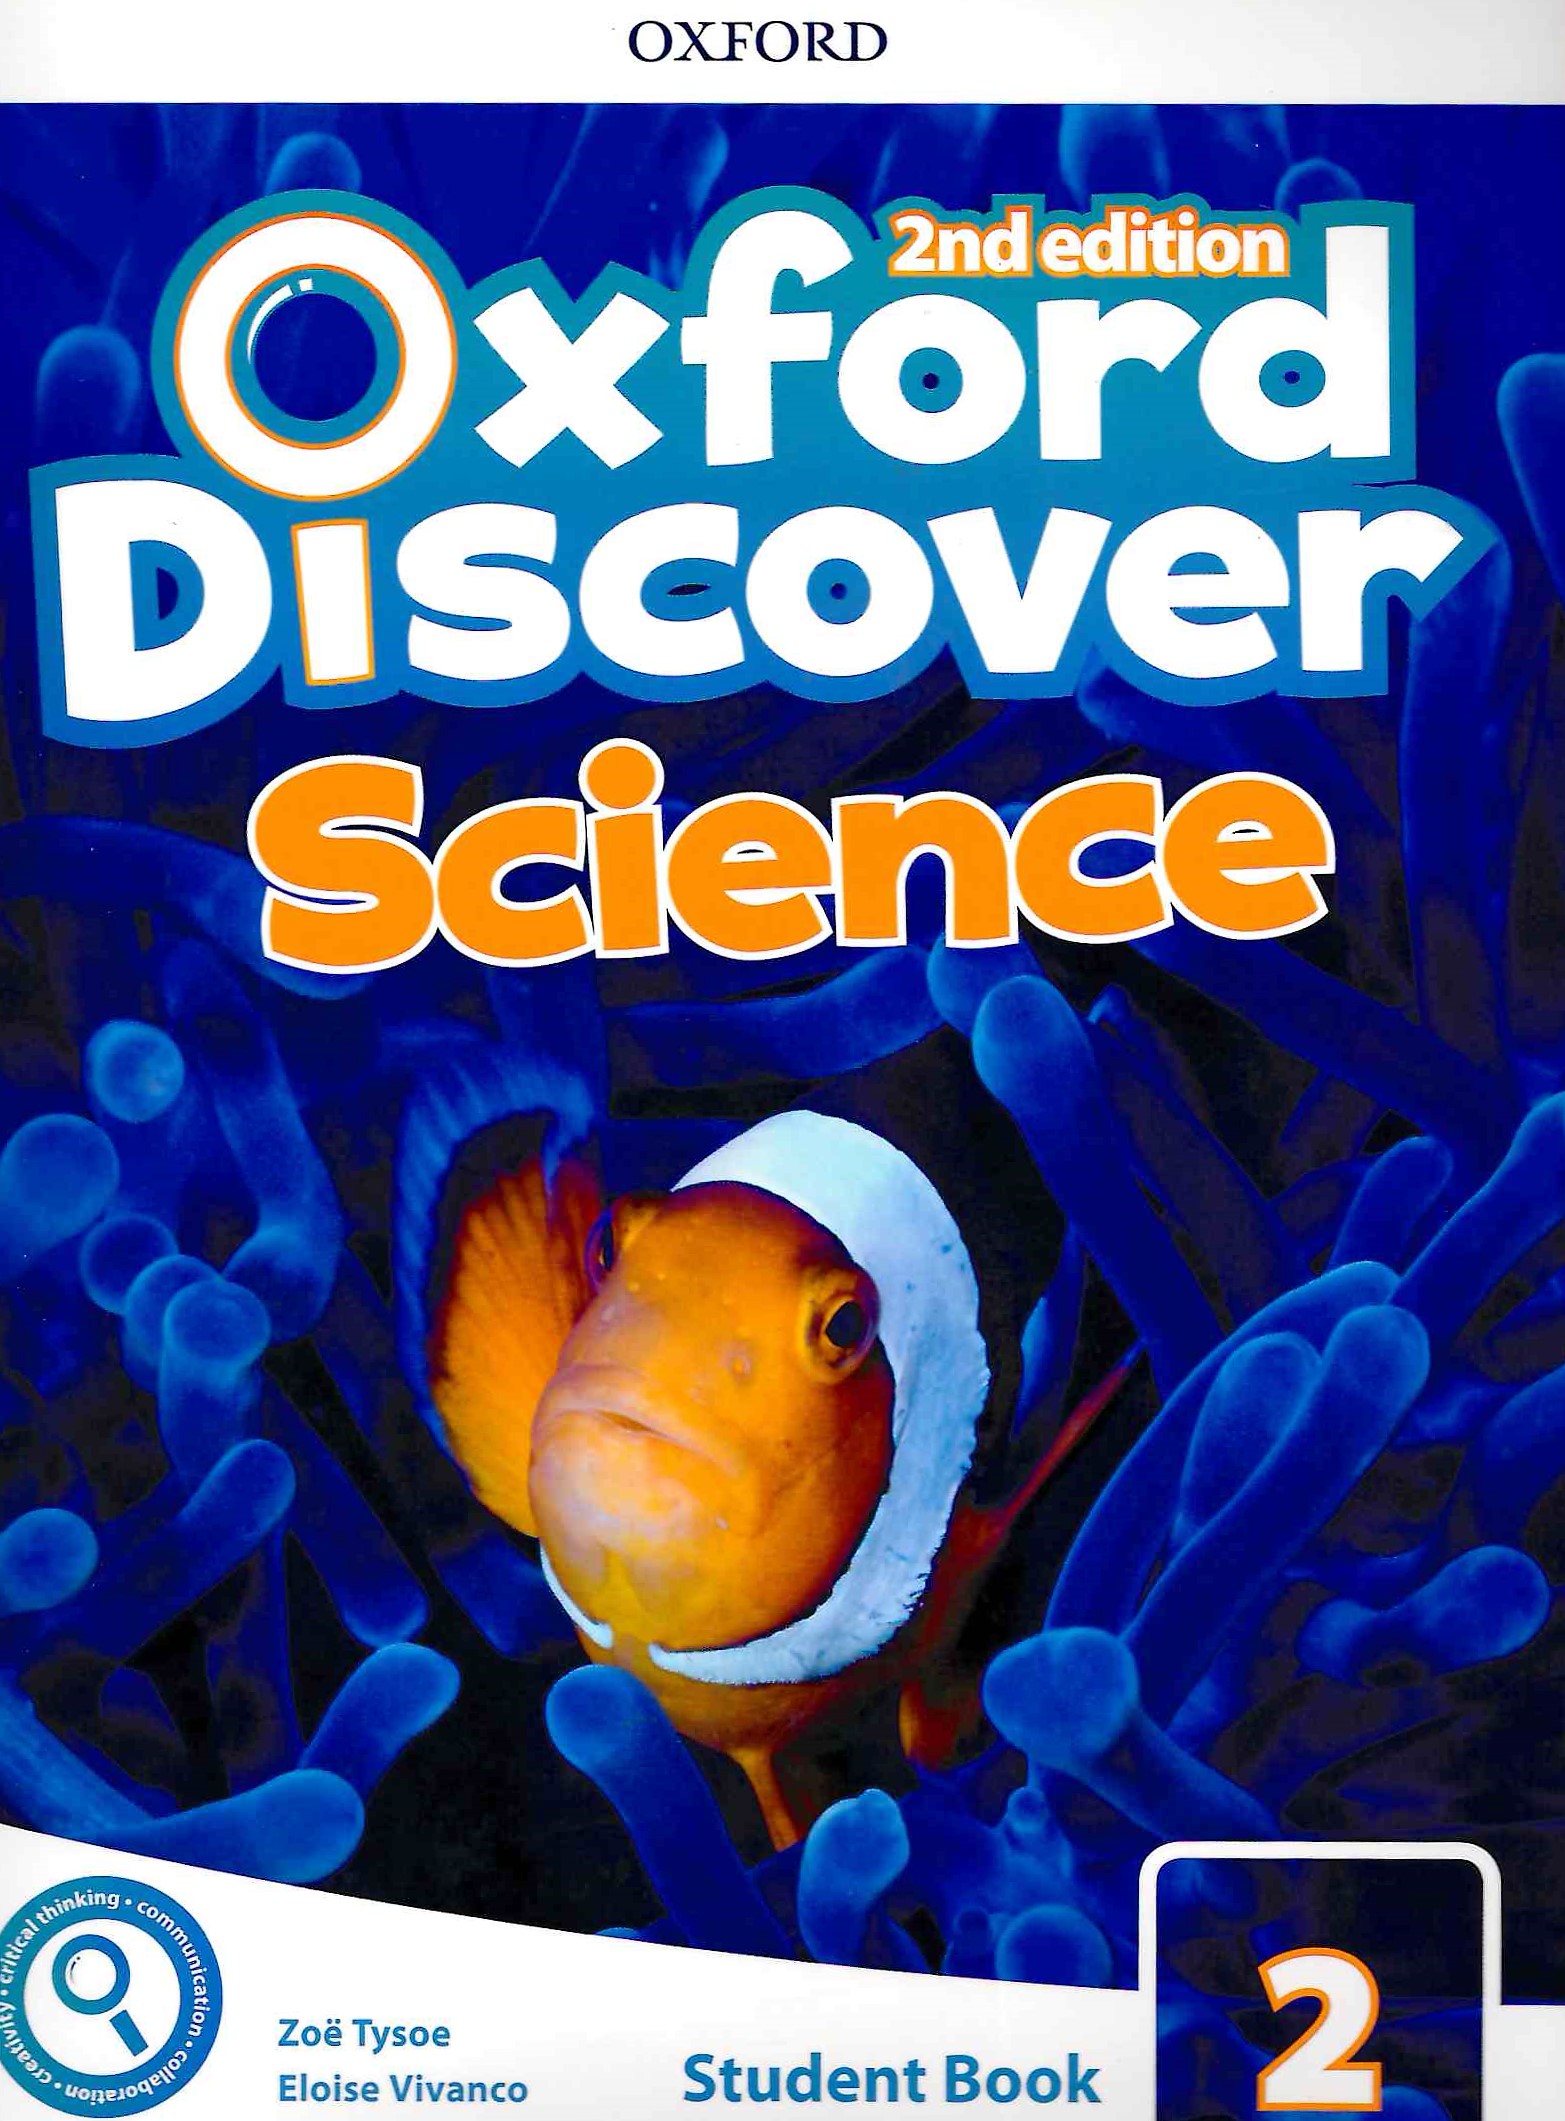 Oxford Discover Science (2nd edition) 2 Student Book + Online Practice / Учебник